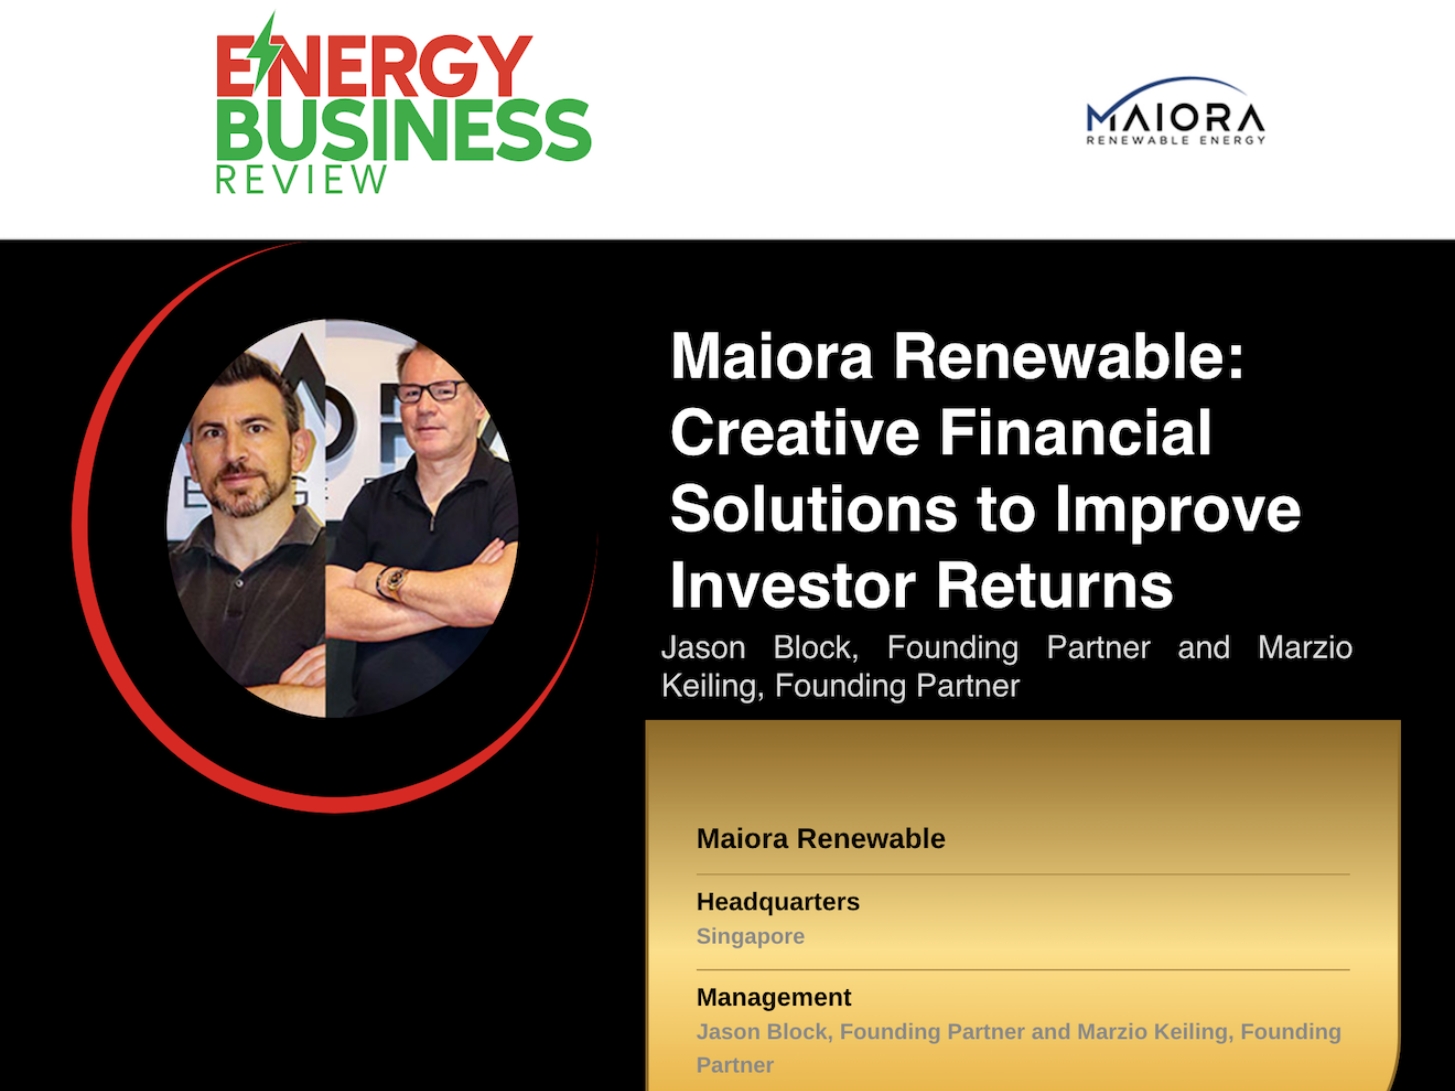 Interview with Energy Business Review